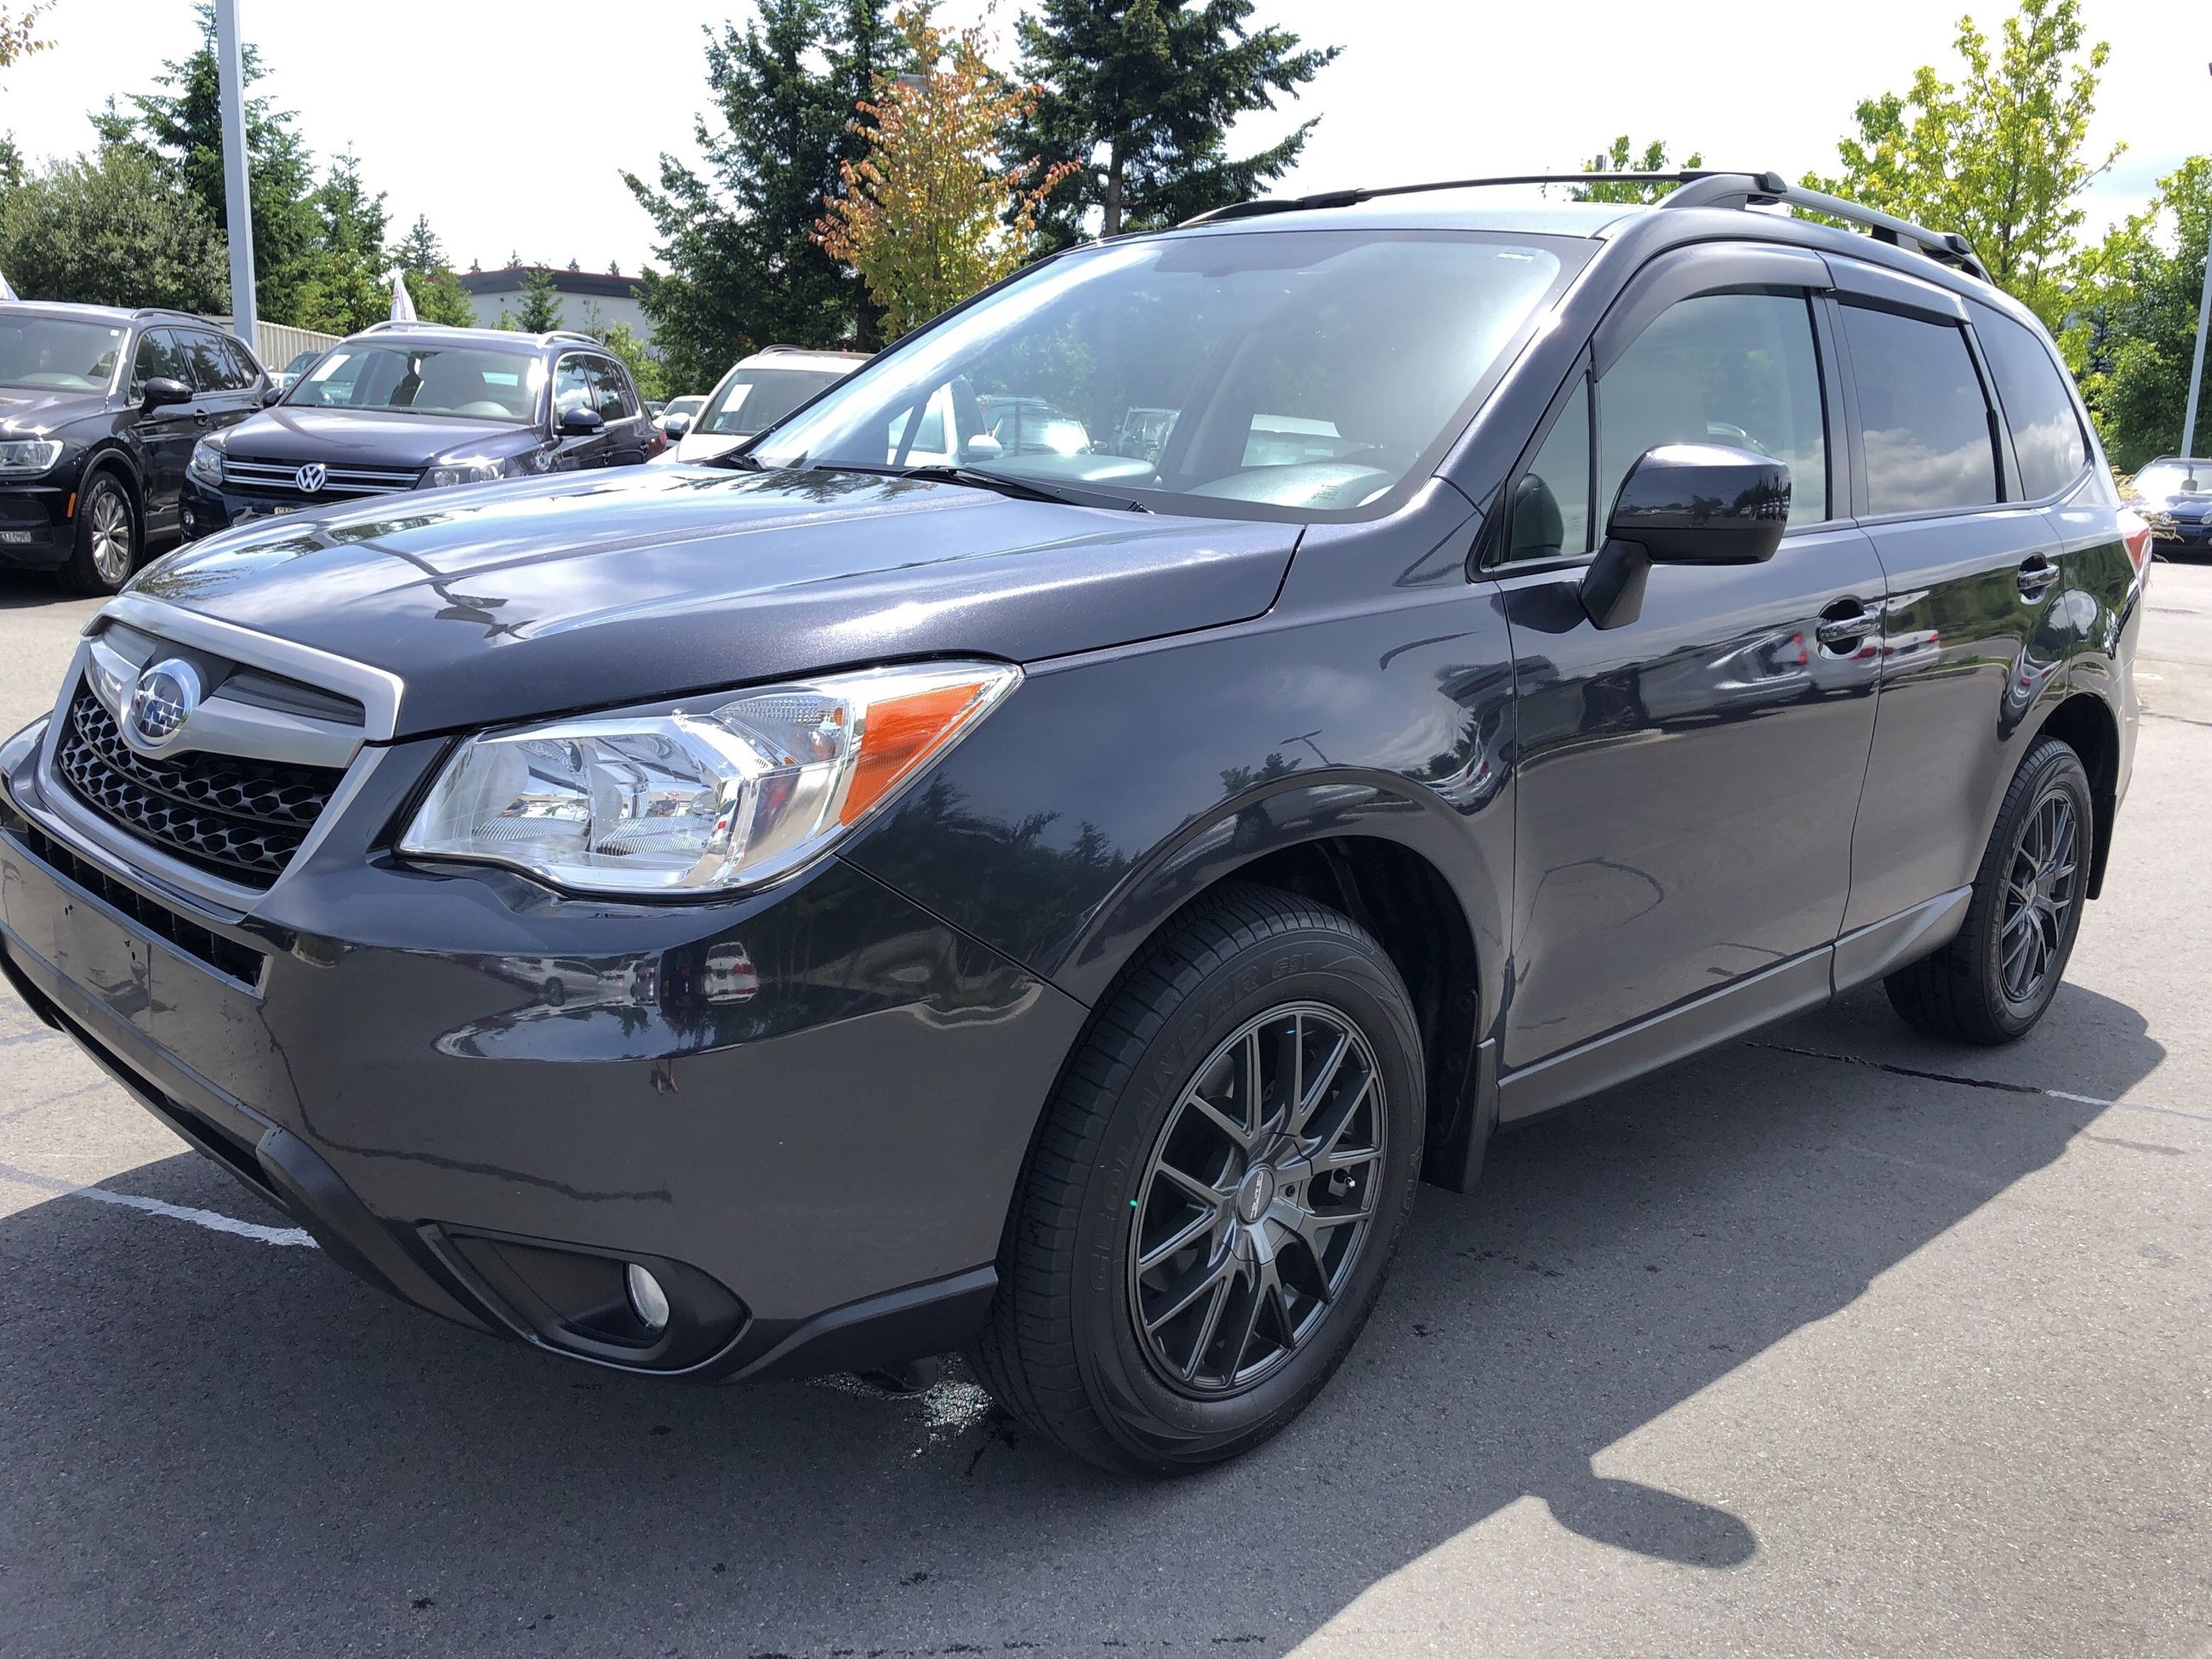 Used 2015 Subaru Forester I Convenience for Sale 20995